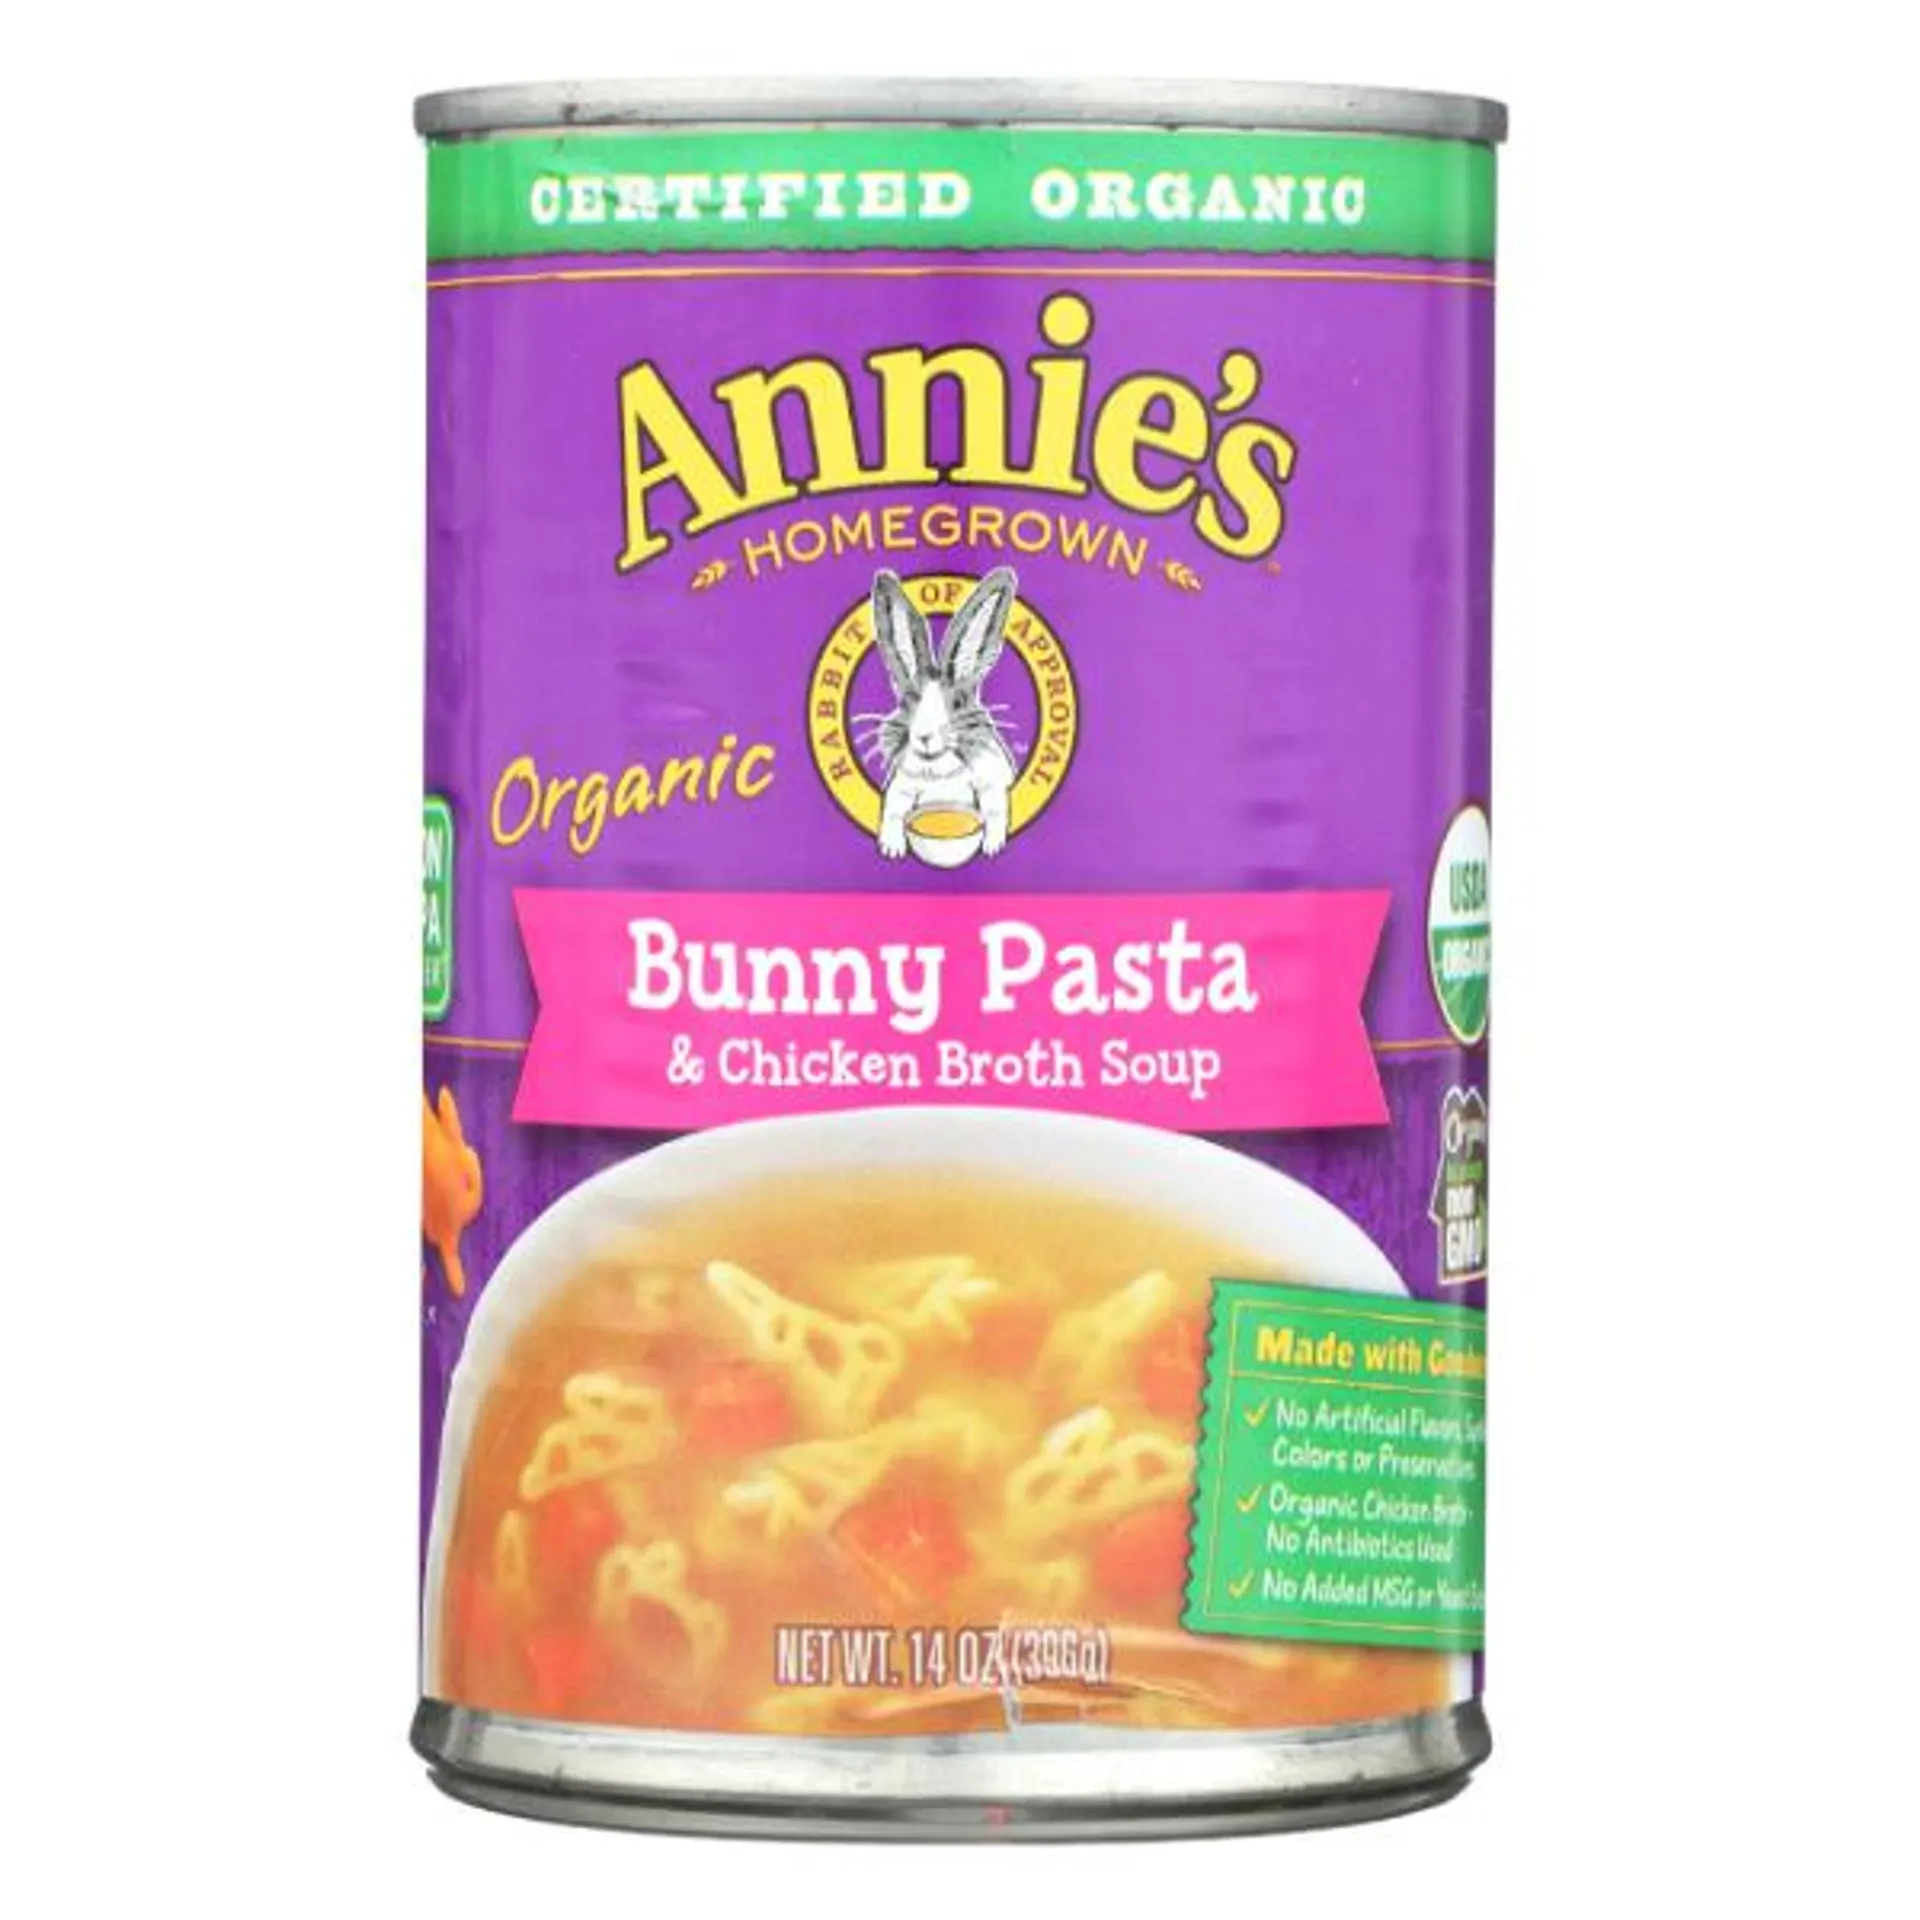 Annies Homegrown Bunny Pasta Chicken Soup - 14 Ounce